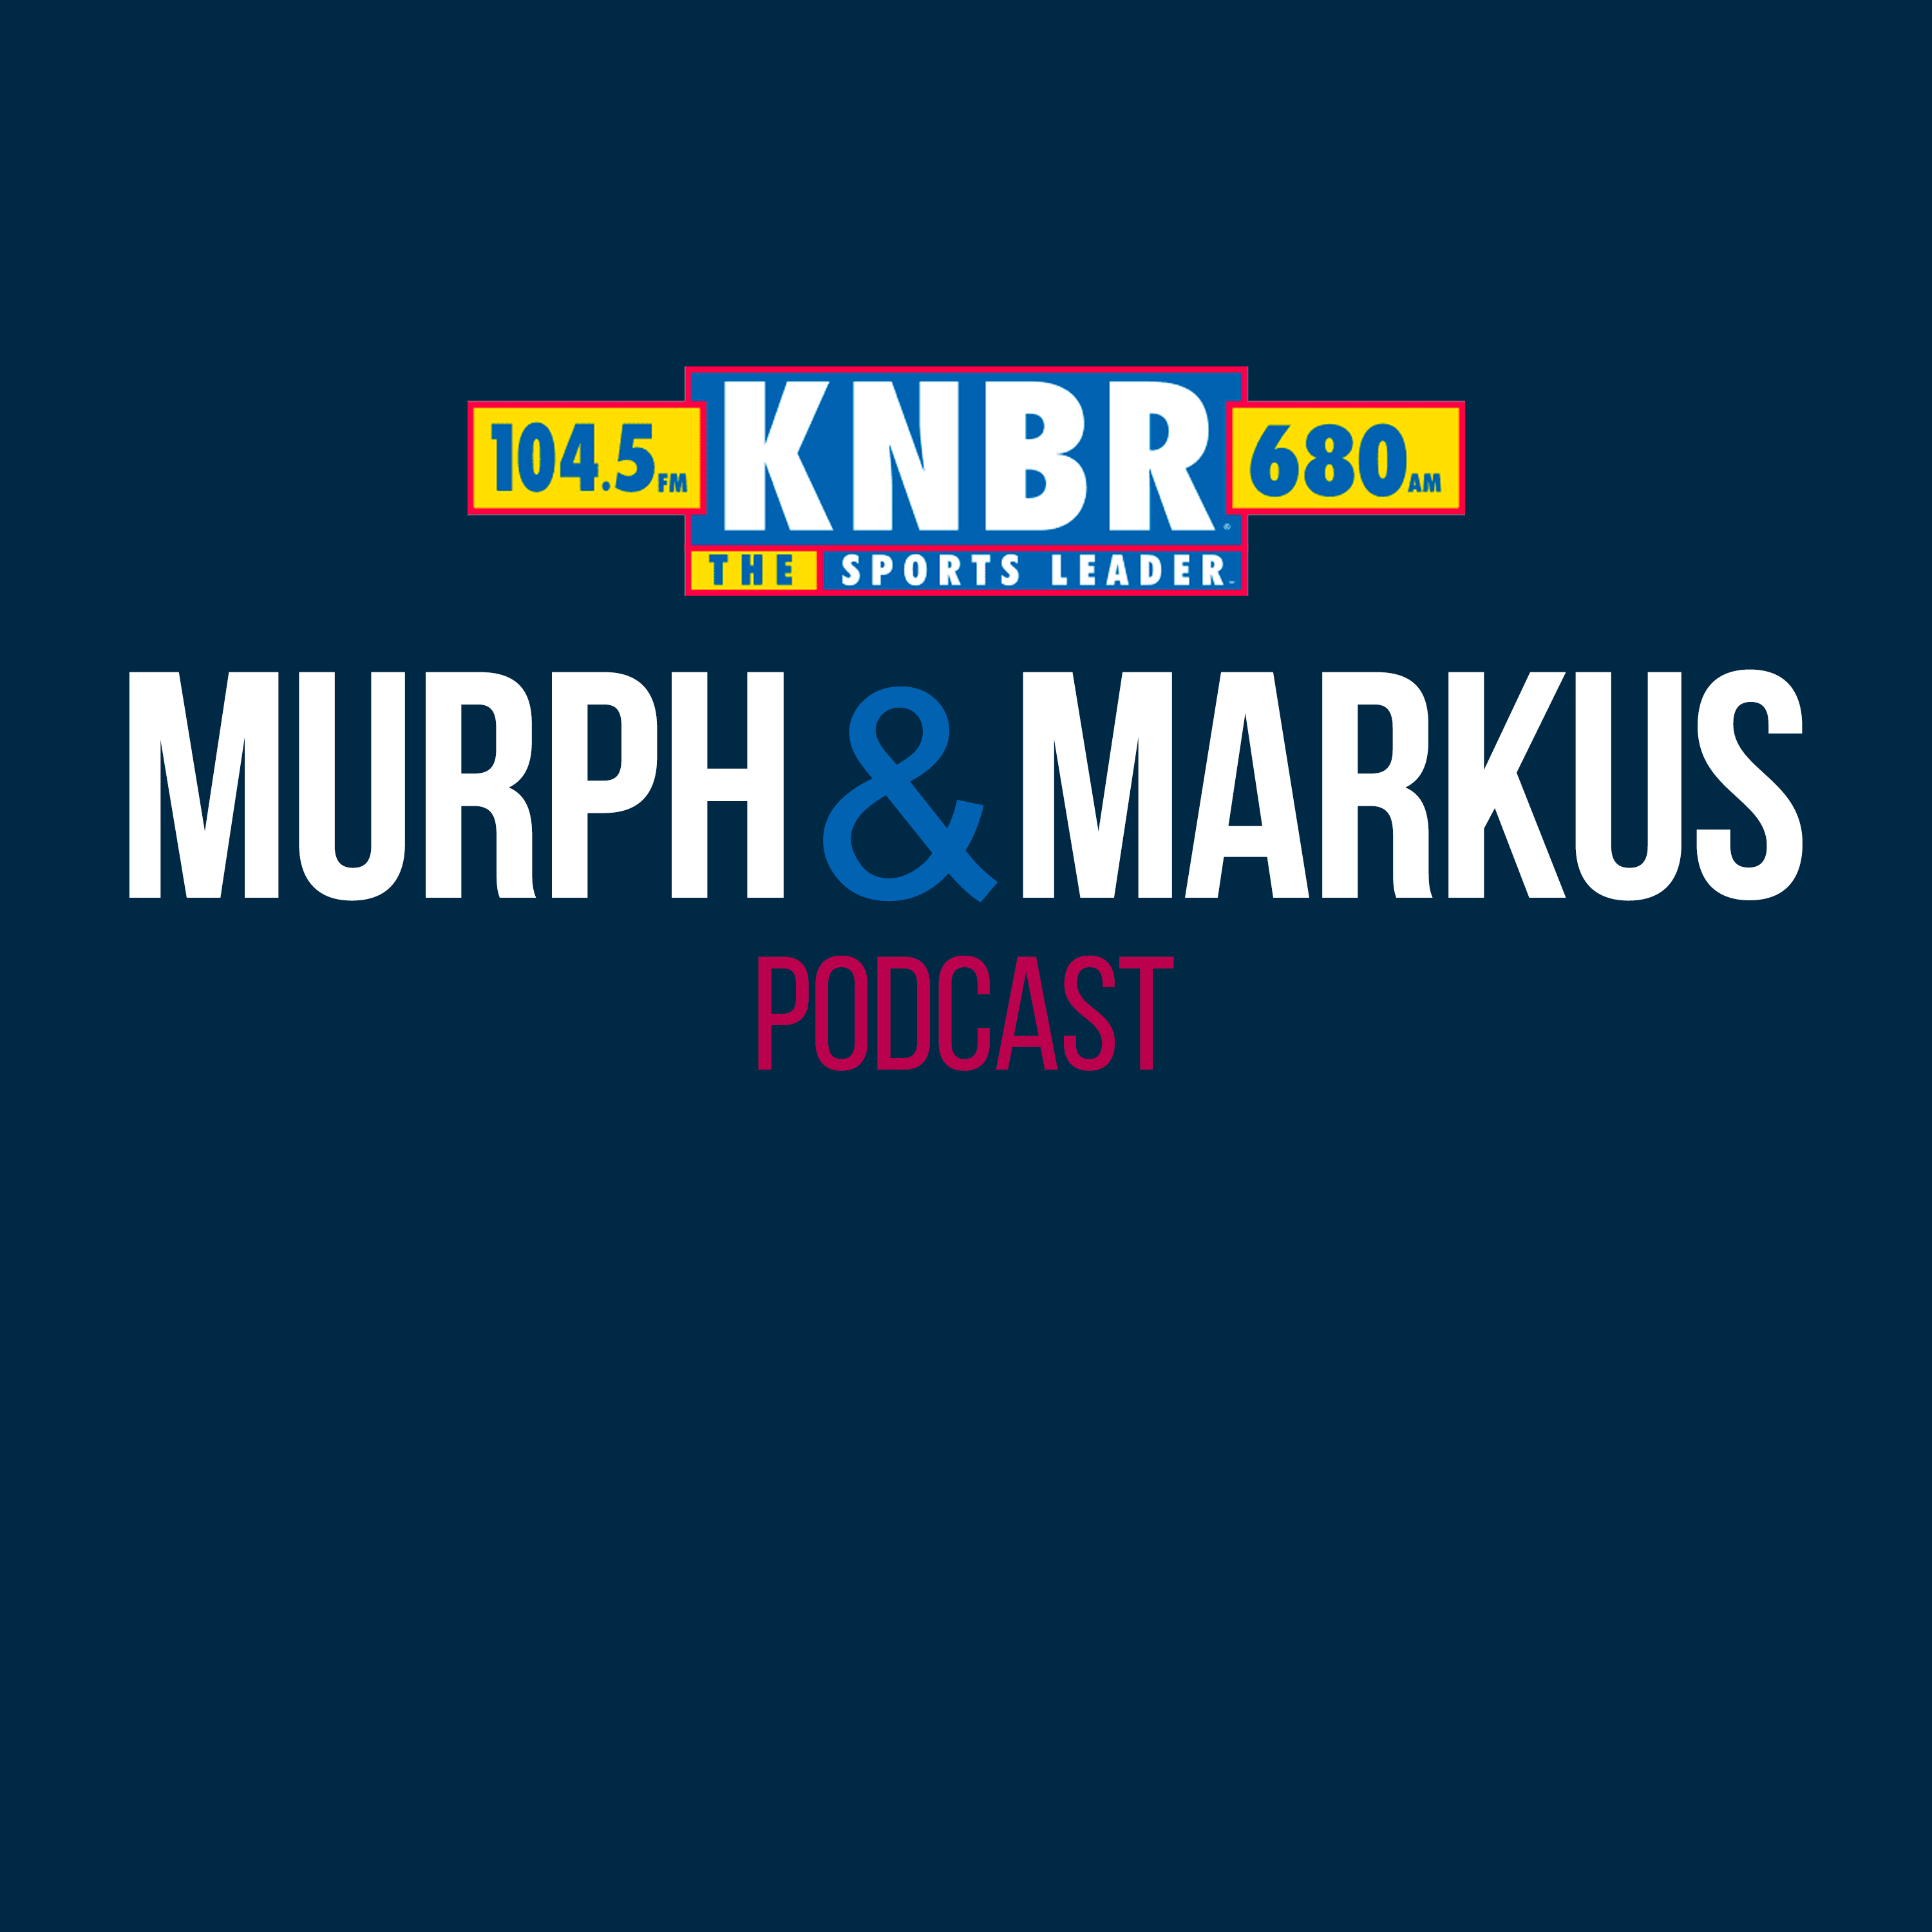 7-30 Duane Kuiper joins Murph & Markus to provide his insight on the Giants trading Jorge Soler to Atlanta, and what it means for Marco Luciano as well as the rest of the trade deadline